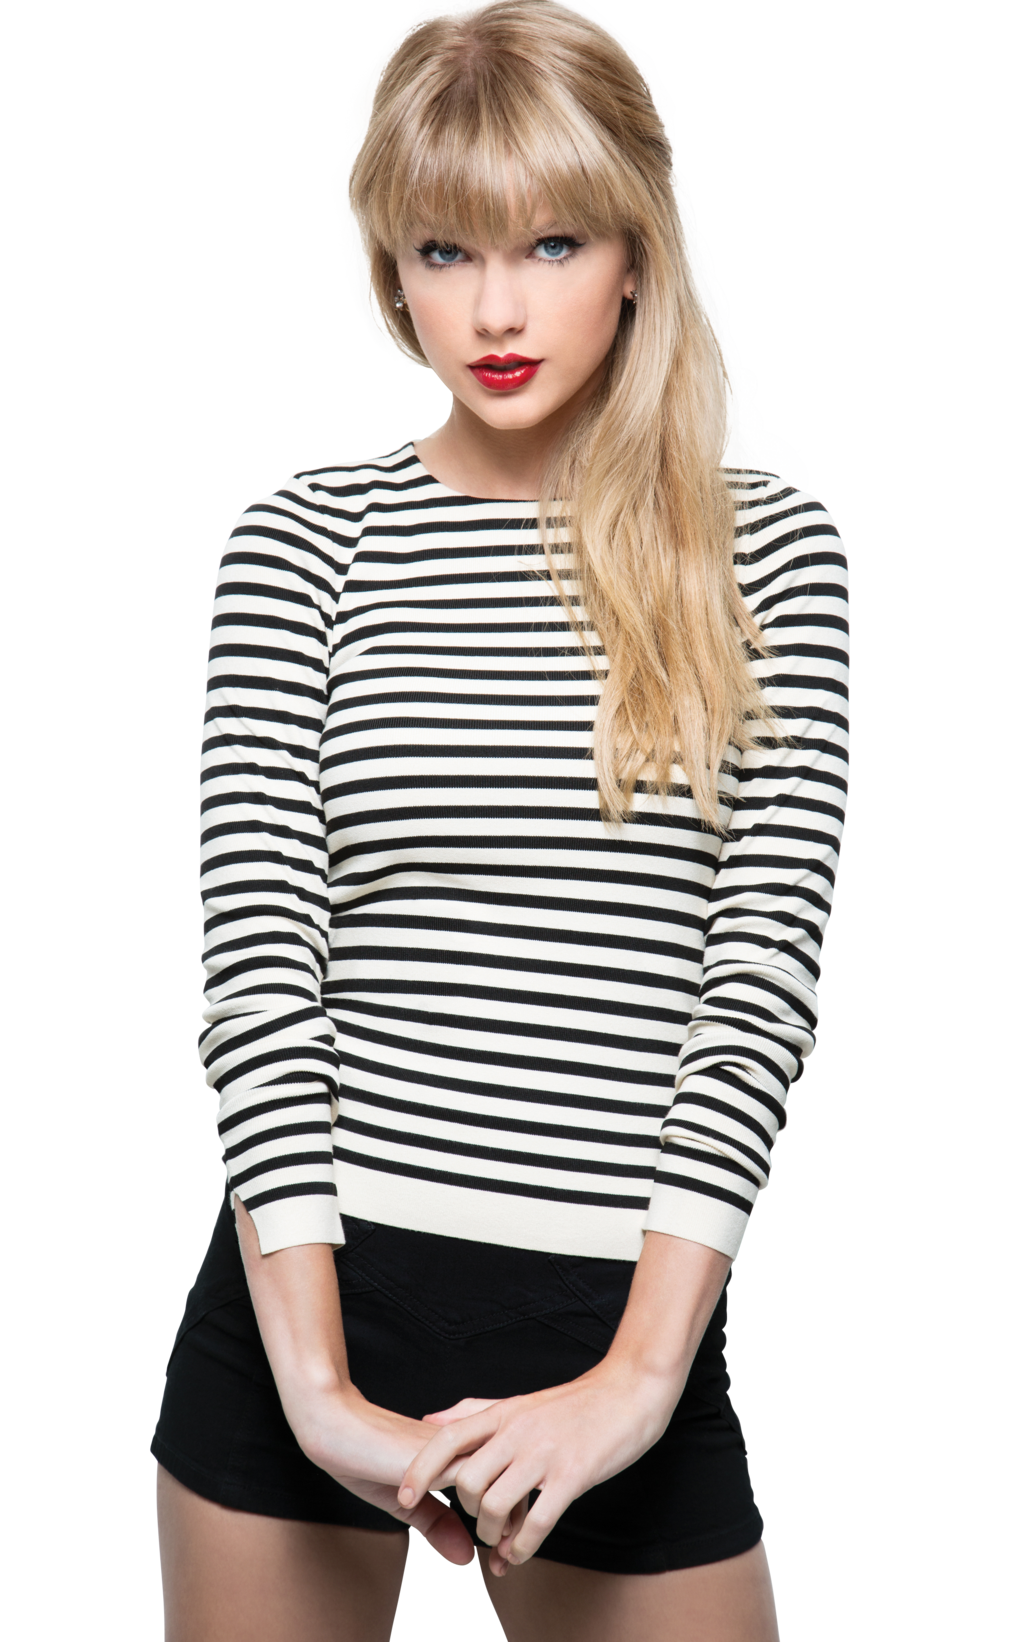 Taylor Swift PNG Image